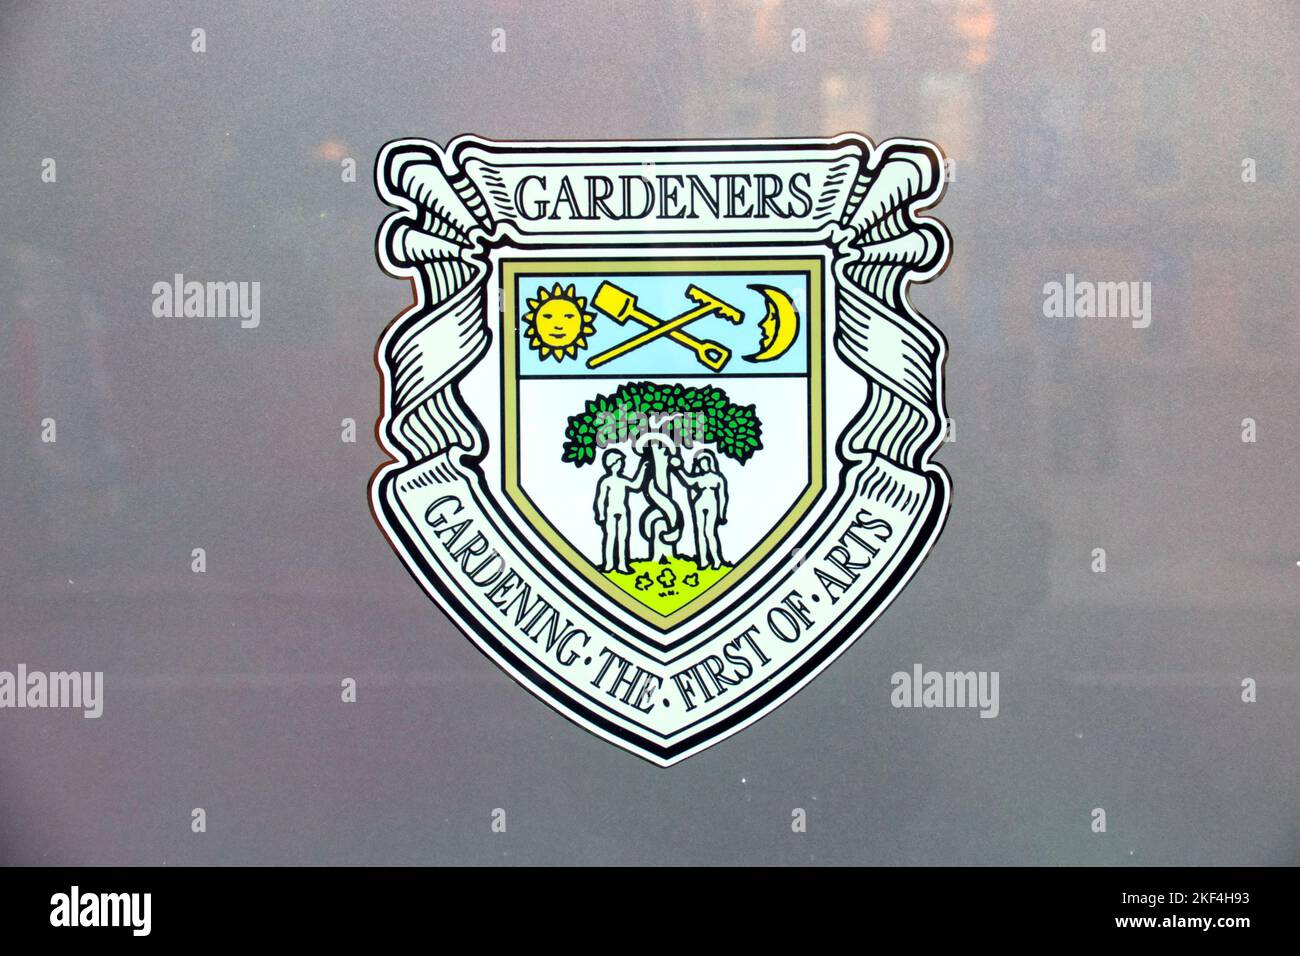 trades hall Glasgow close up of coat of arms for trade guild gardeners Stock Photo